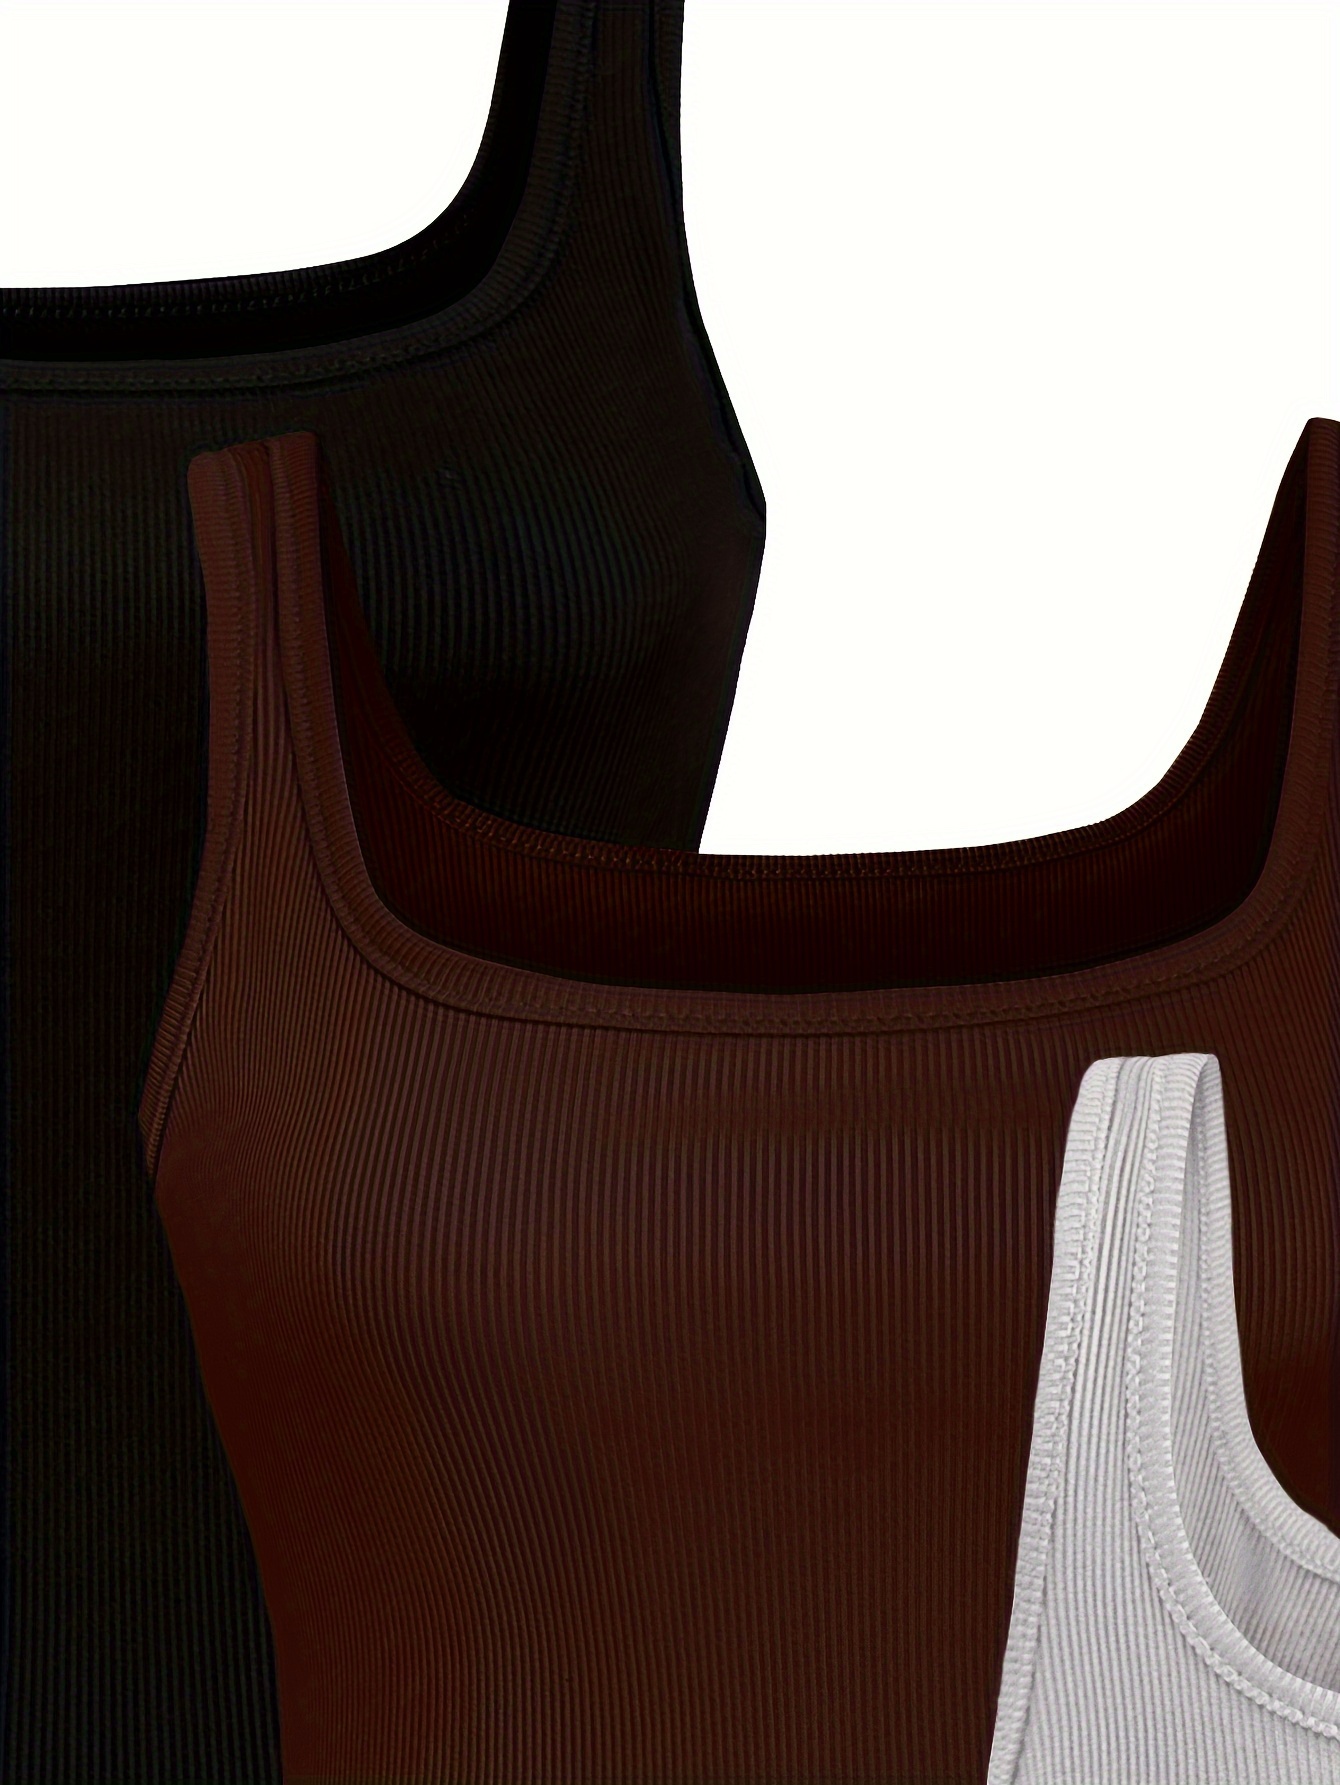 Bodysuits for Women Square Neck Sleeveless Sexy Tank Tops Solid